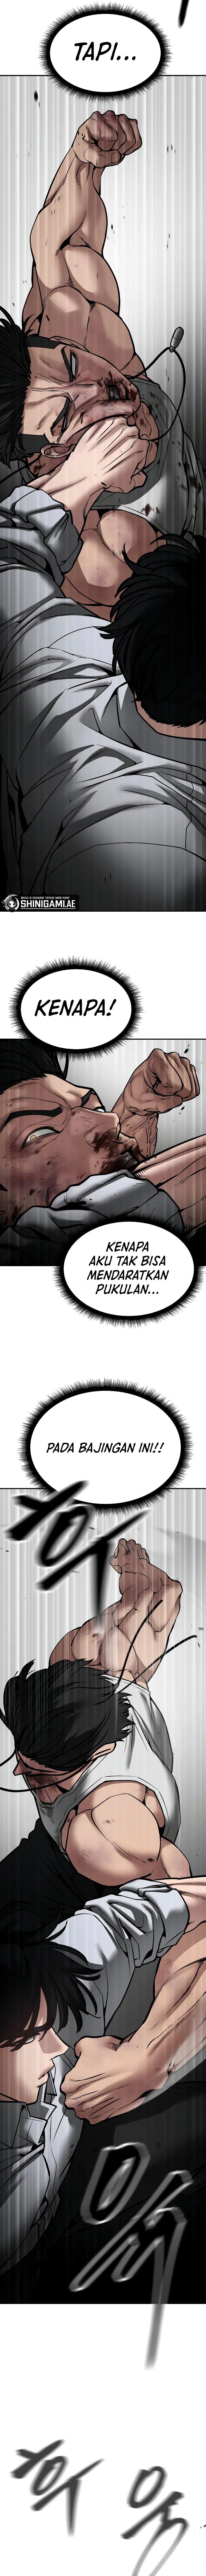 the-bully-in-charge Chapter 82